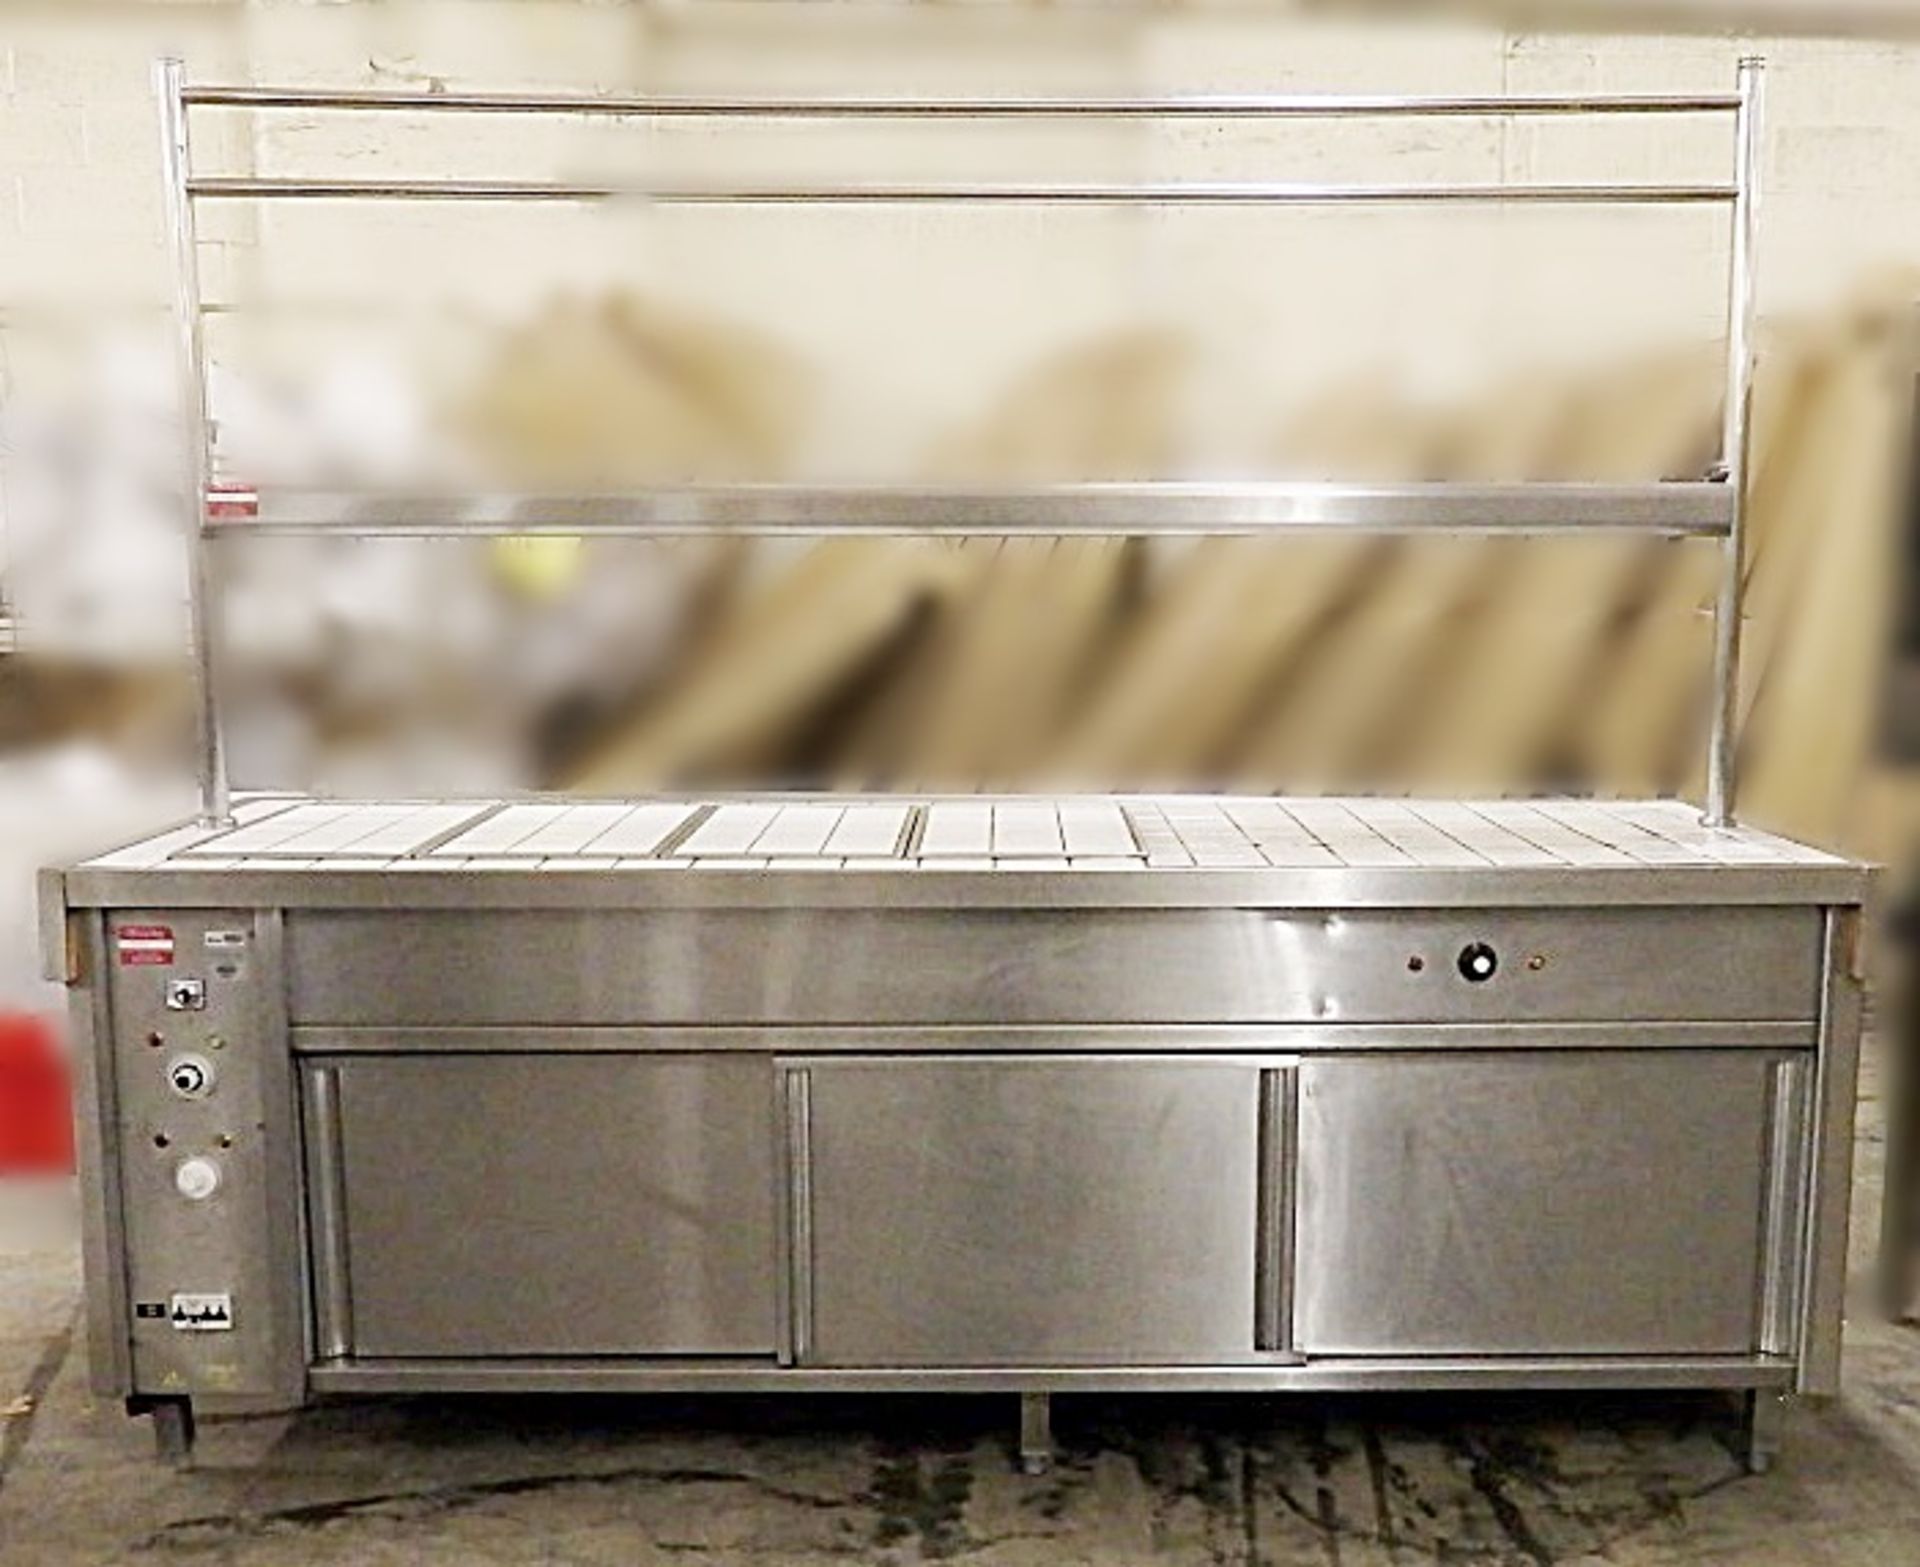 1 x Commercial Large Bain Marie Topped Hot Cupboard - Features Stainless Steel Construction With - Image 13 of 15